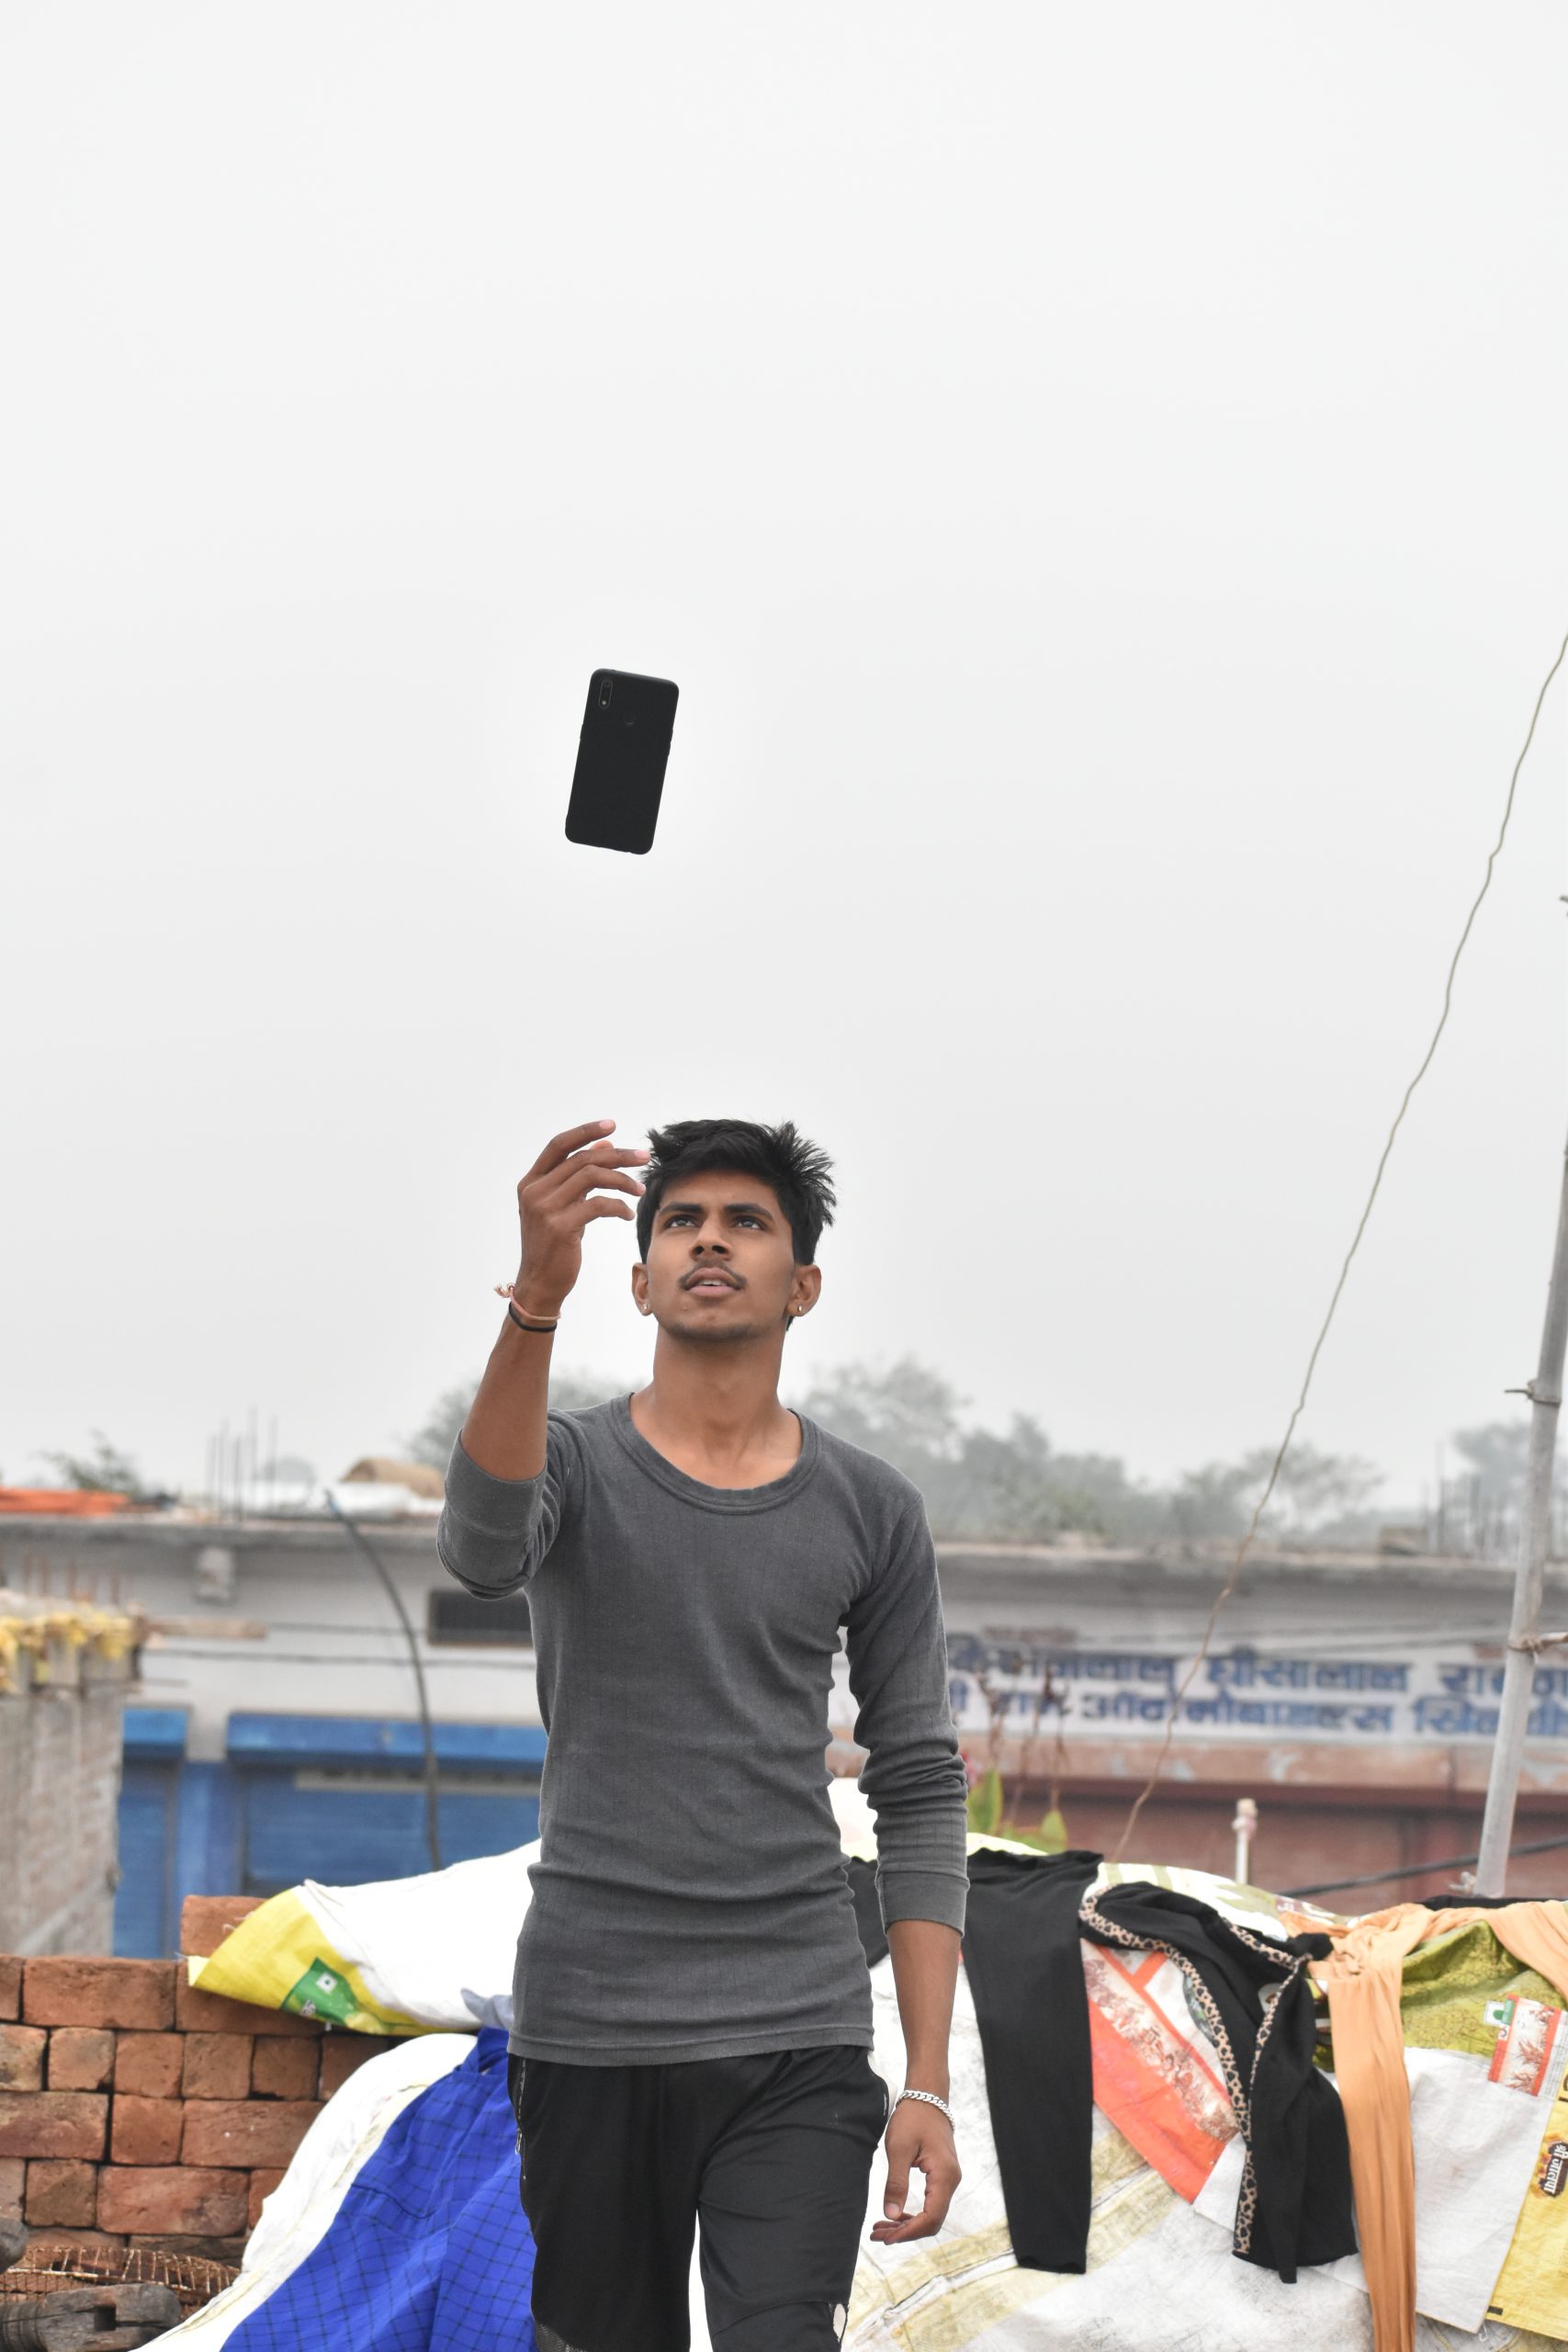 A boy tossing his phone in air